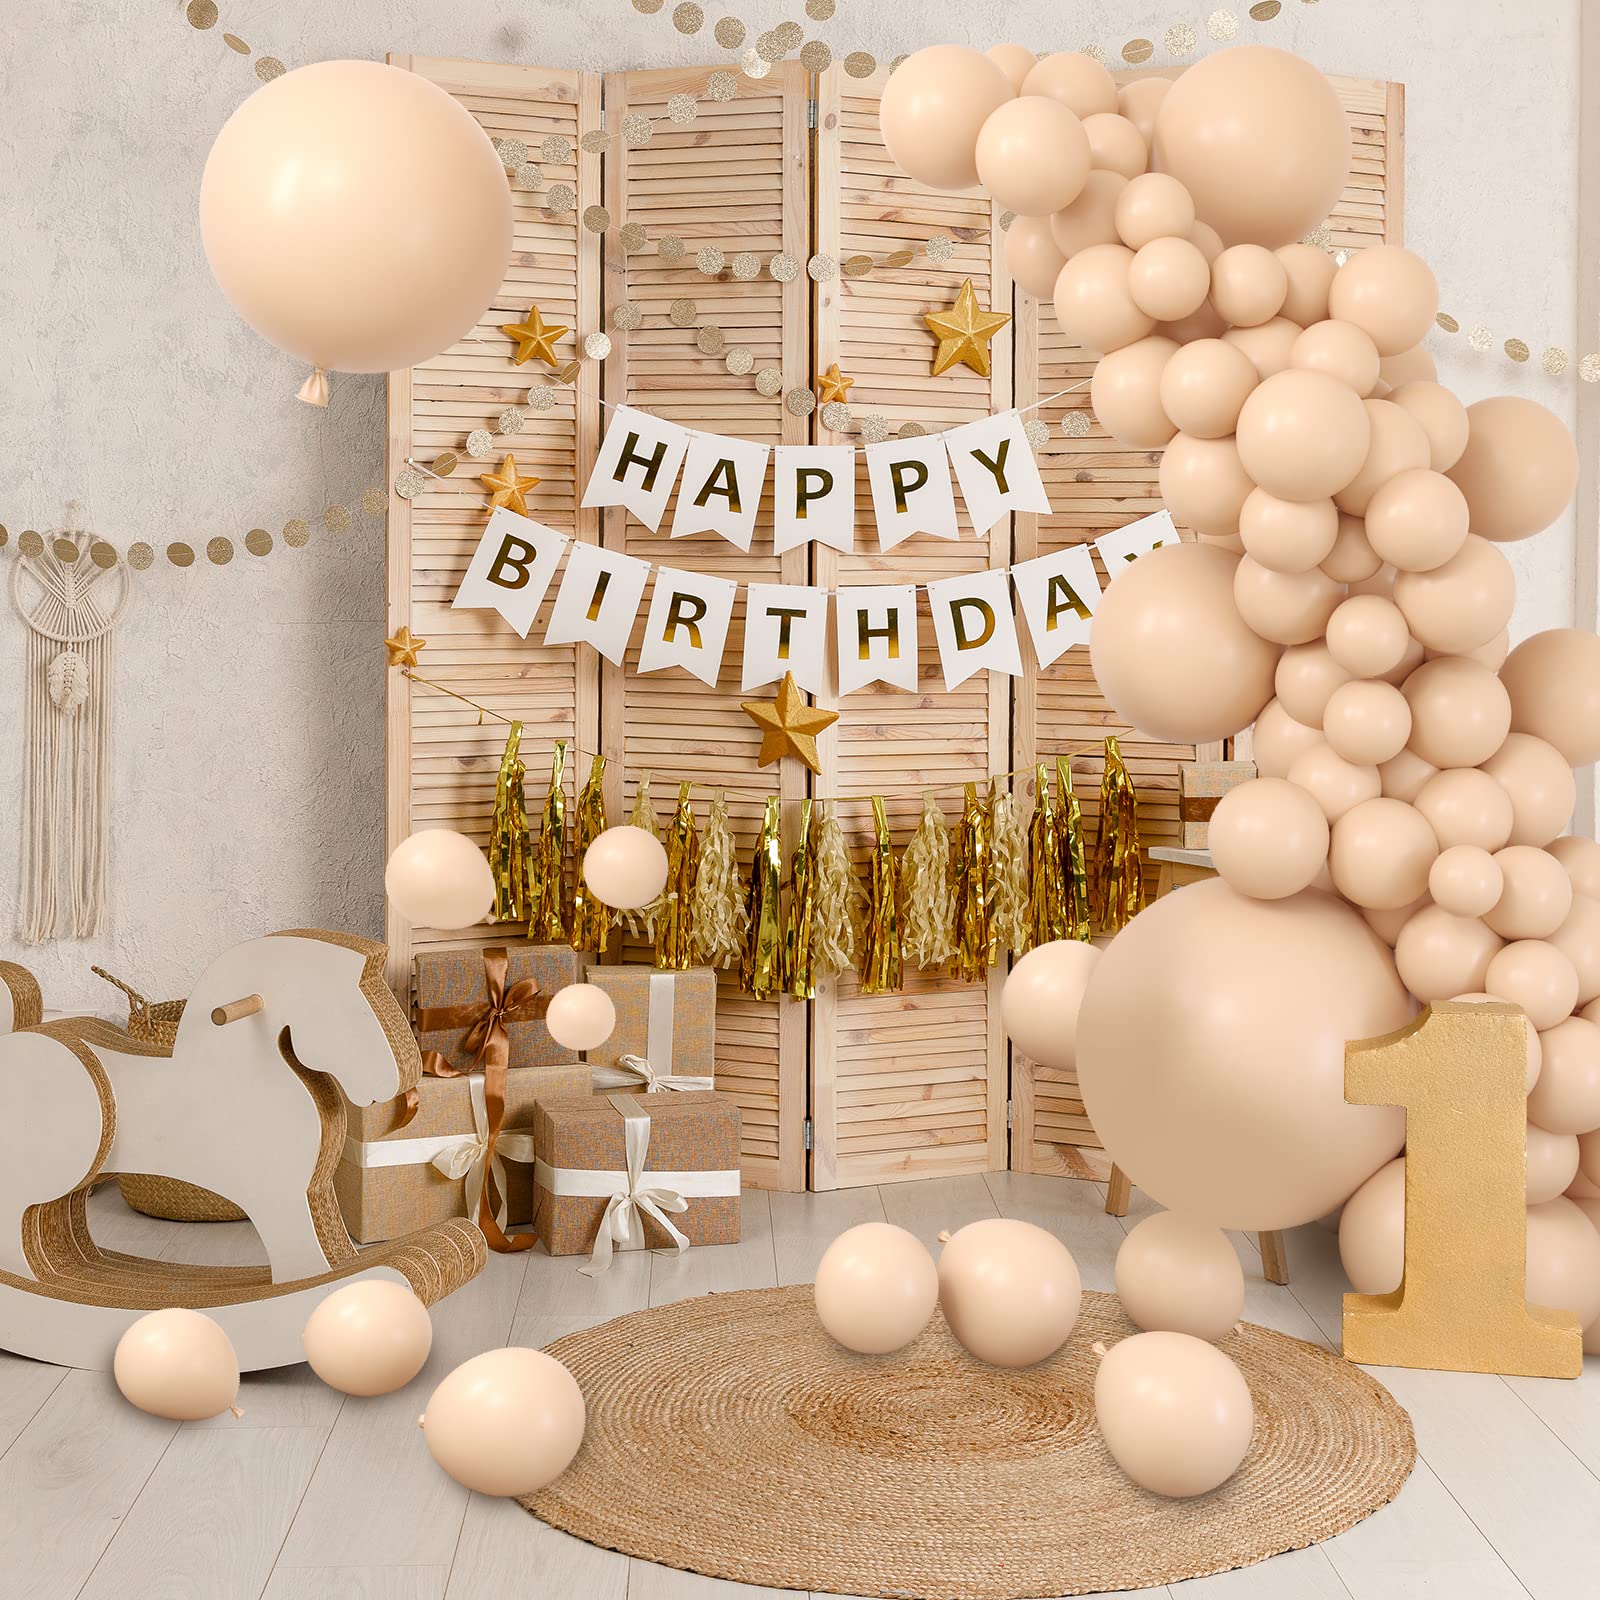 RUBFAC 116pcs Nude Balloons Different Sizes Beige Balloons Pack of 36 18 12 10 5 Inch for Garland Arch Retro Apricot Extra Large Balloons for Birthday Baby Showers Wedding Party Decoration